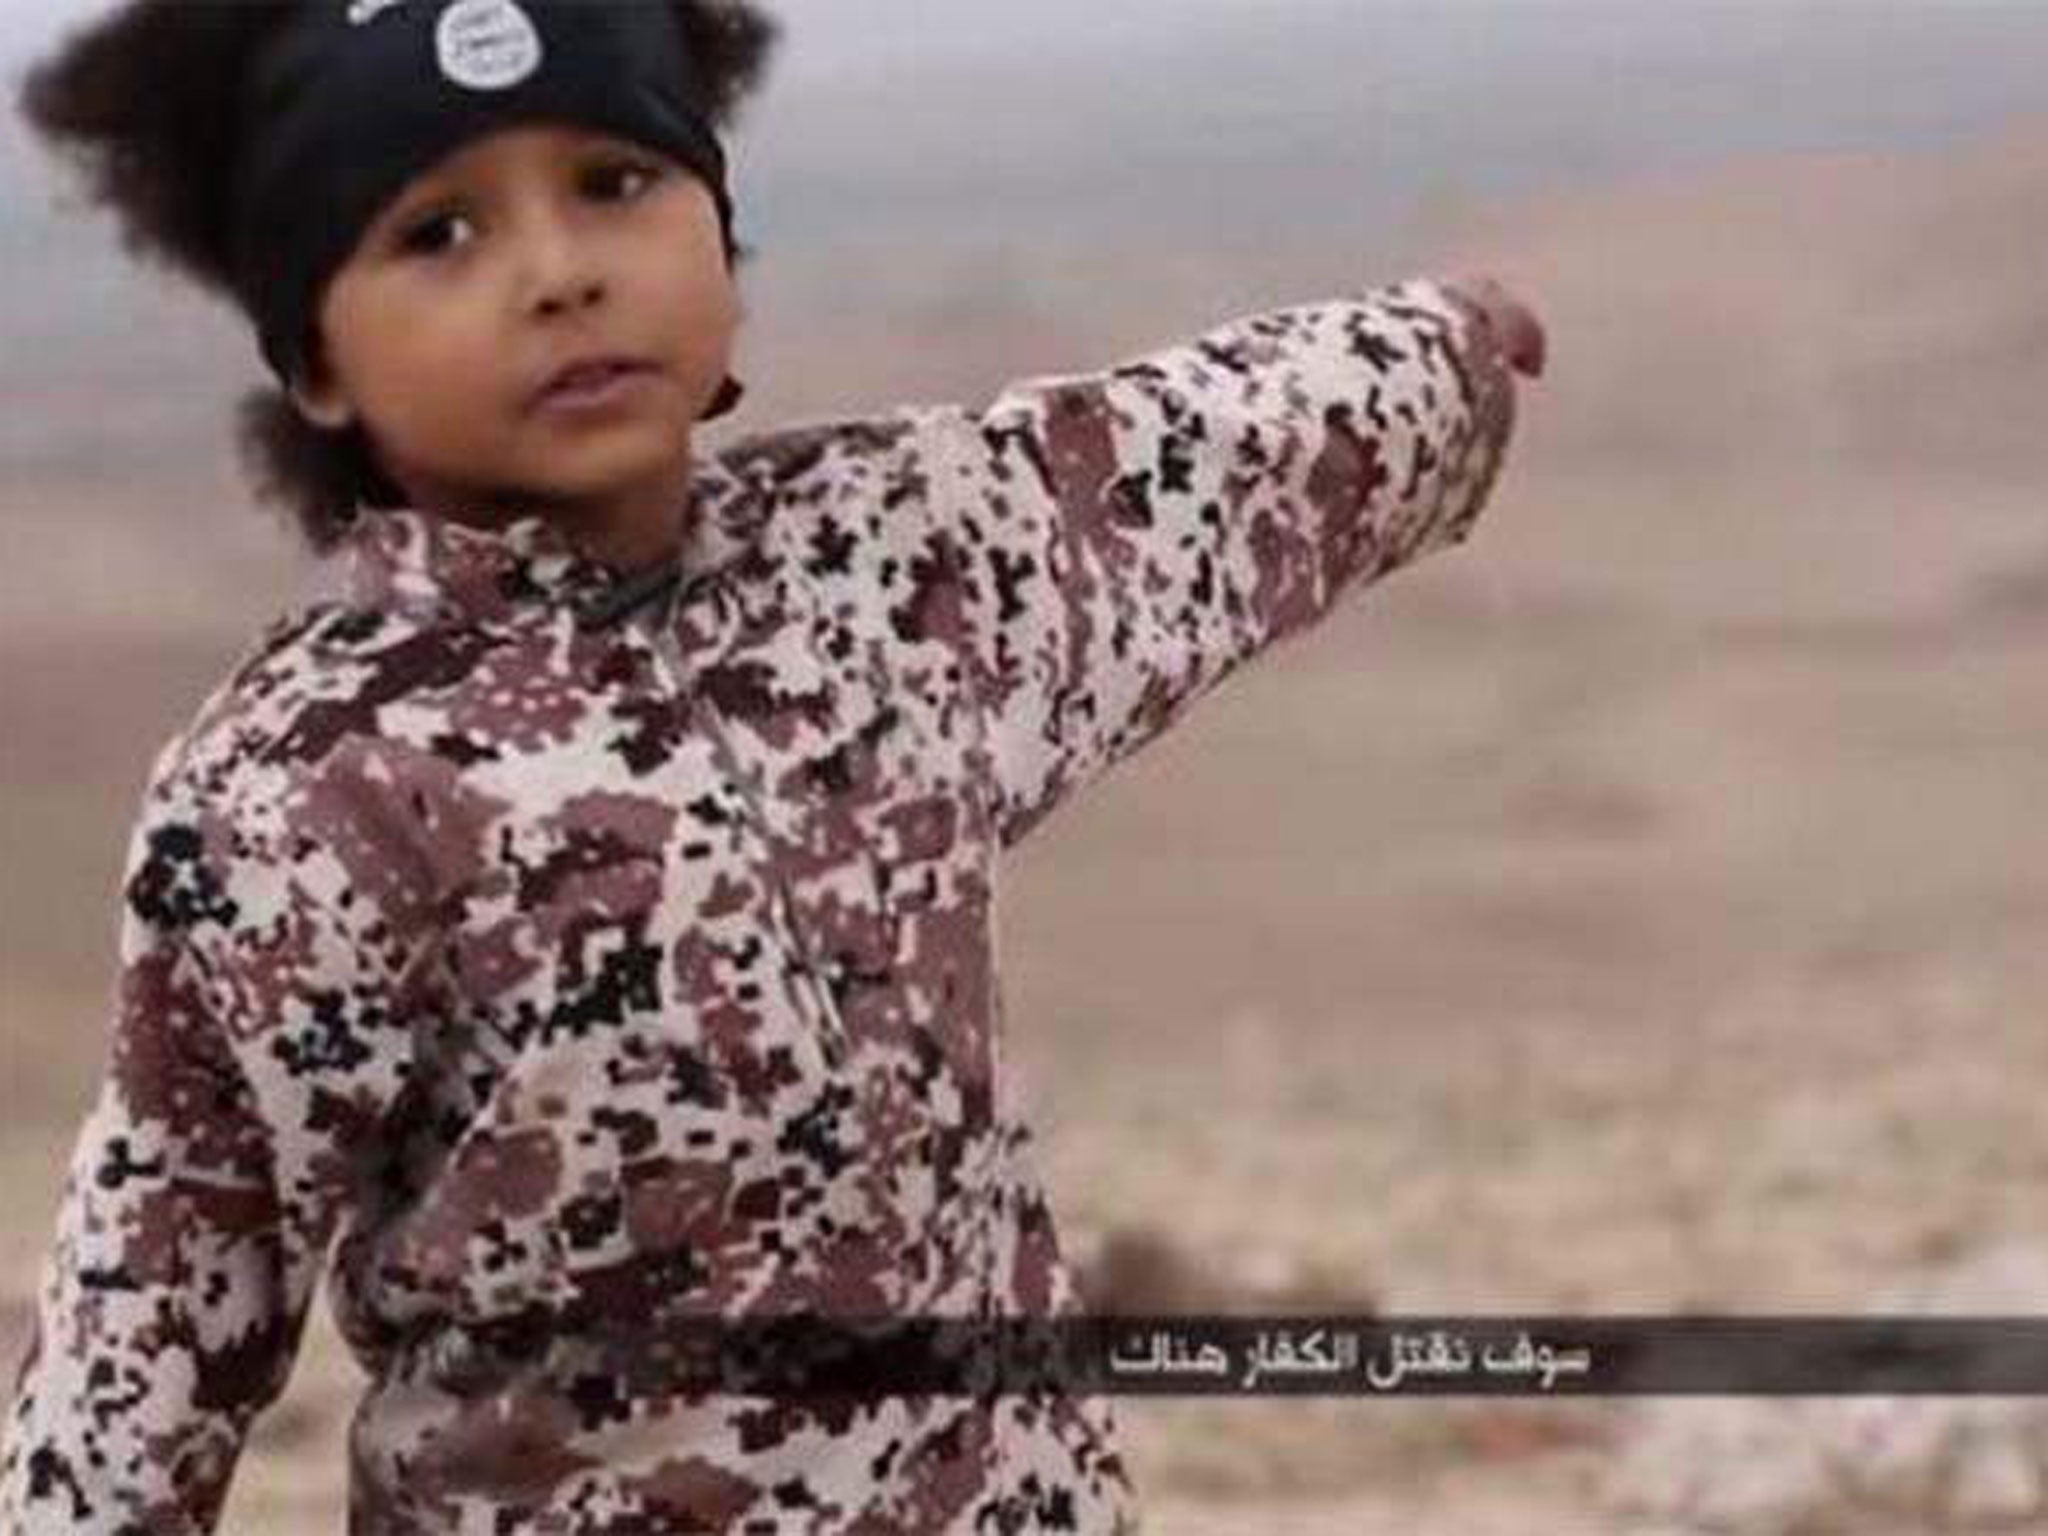 The video begins by showing a young boy with a British accent threatening terrorist acts against the UK